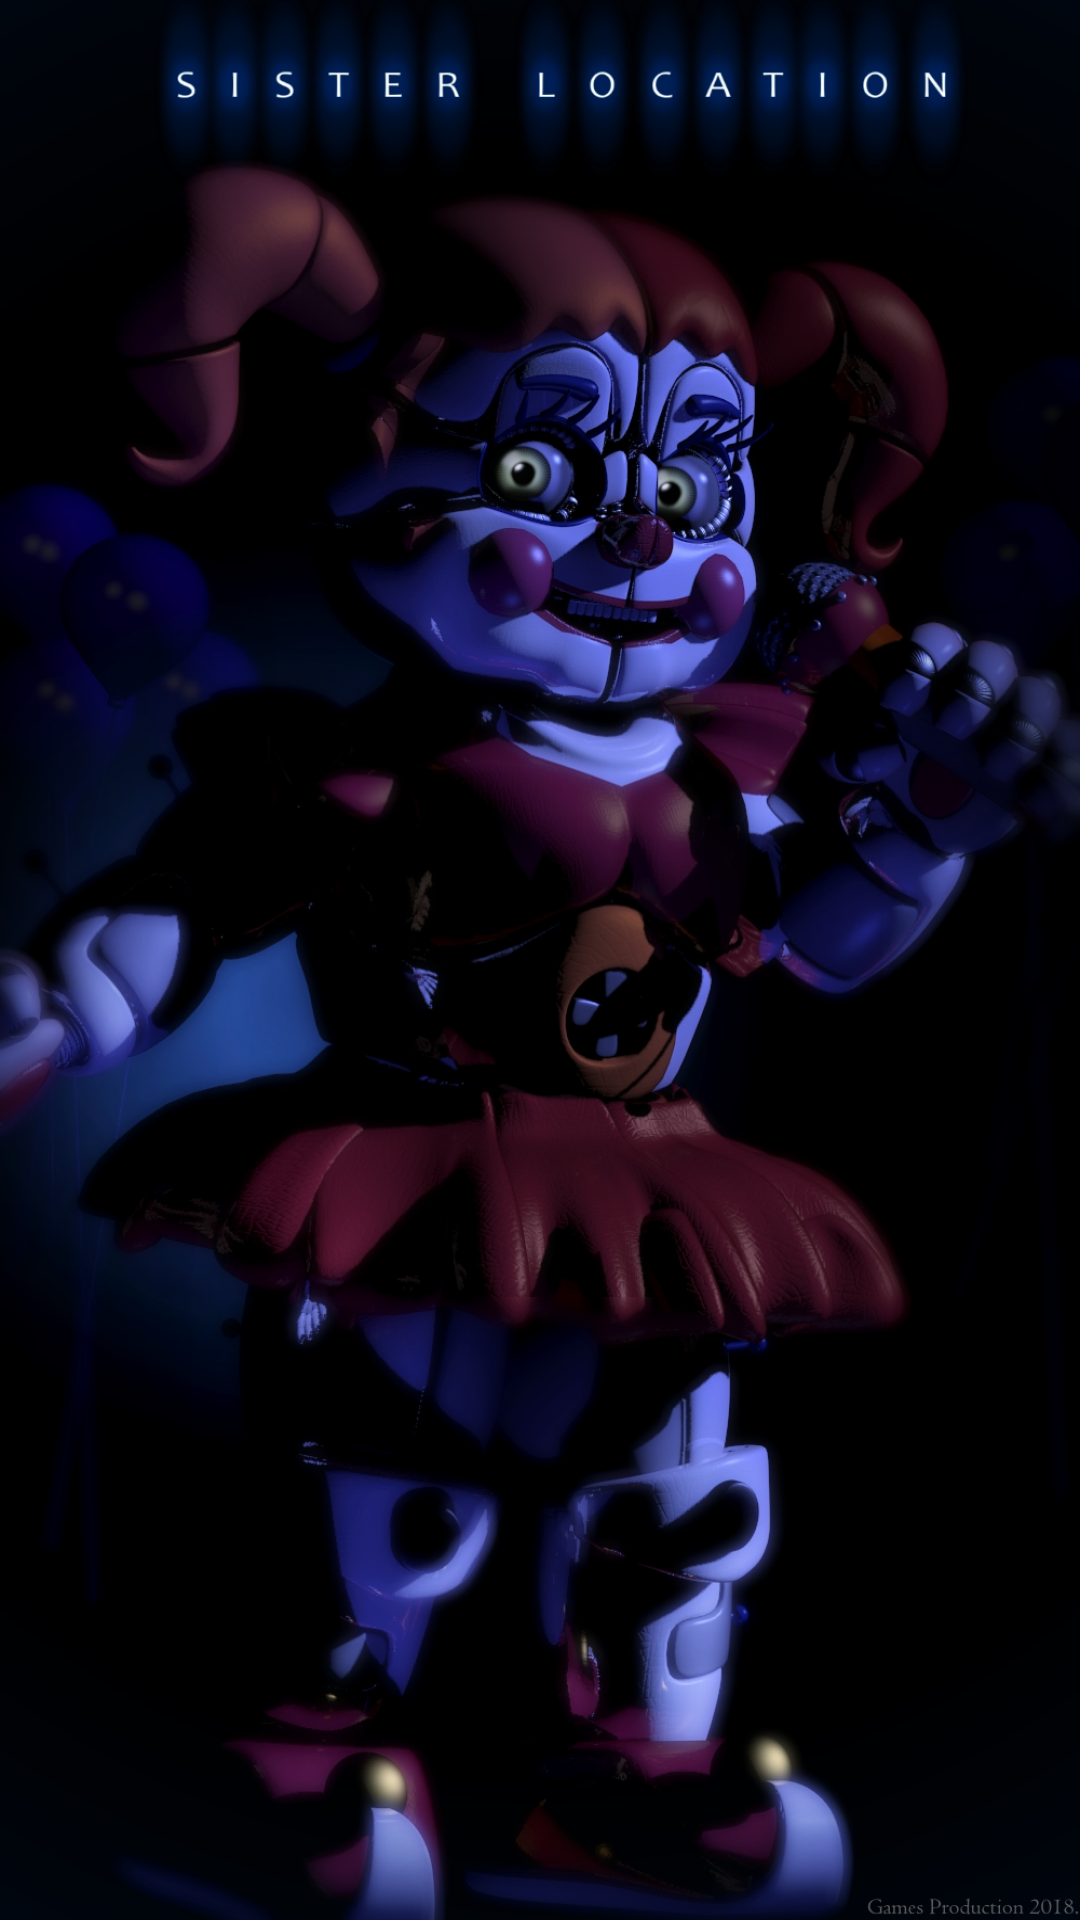 Video Game Five Nights At Freddy's: Sister Location (1080x1920) Wallpaper